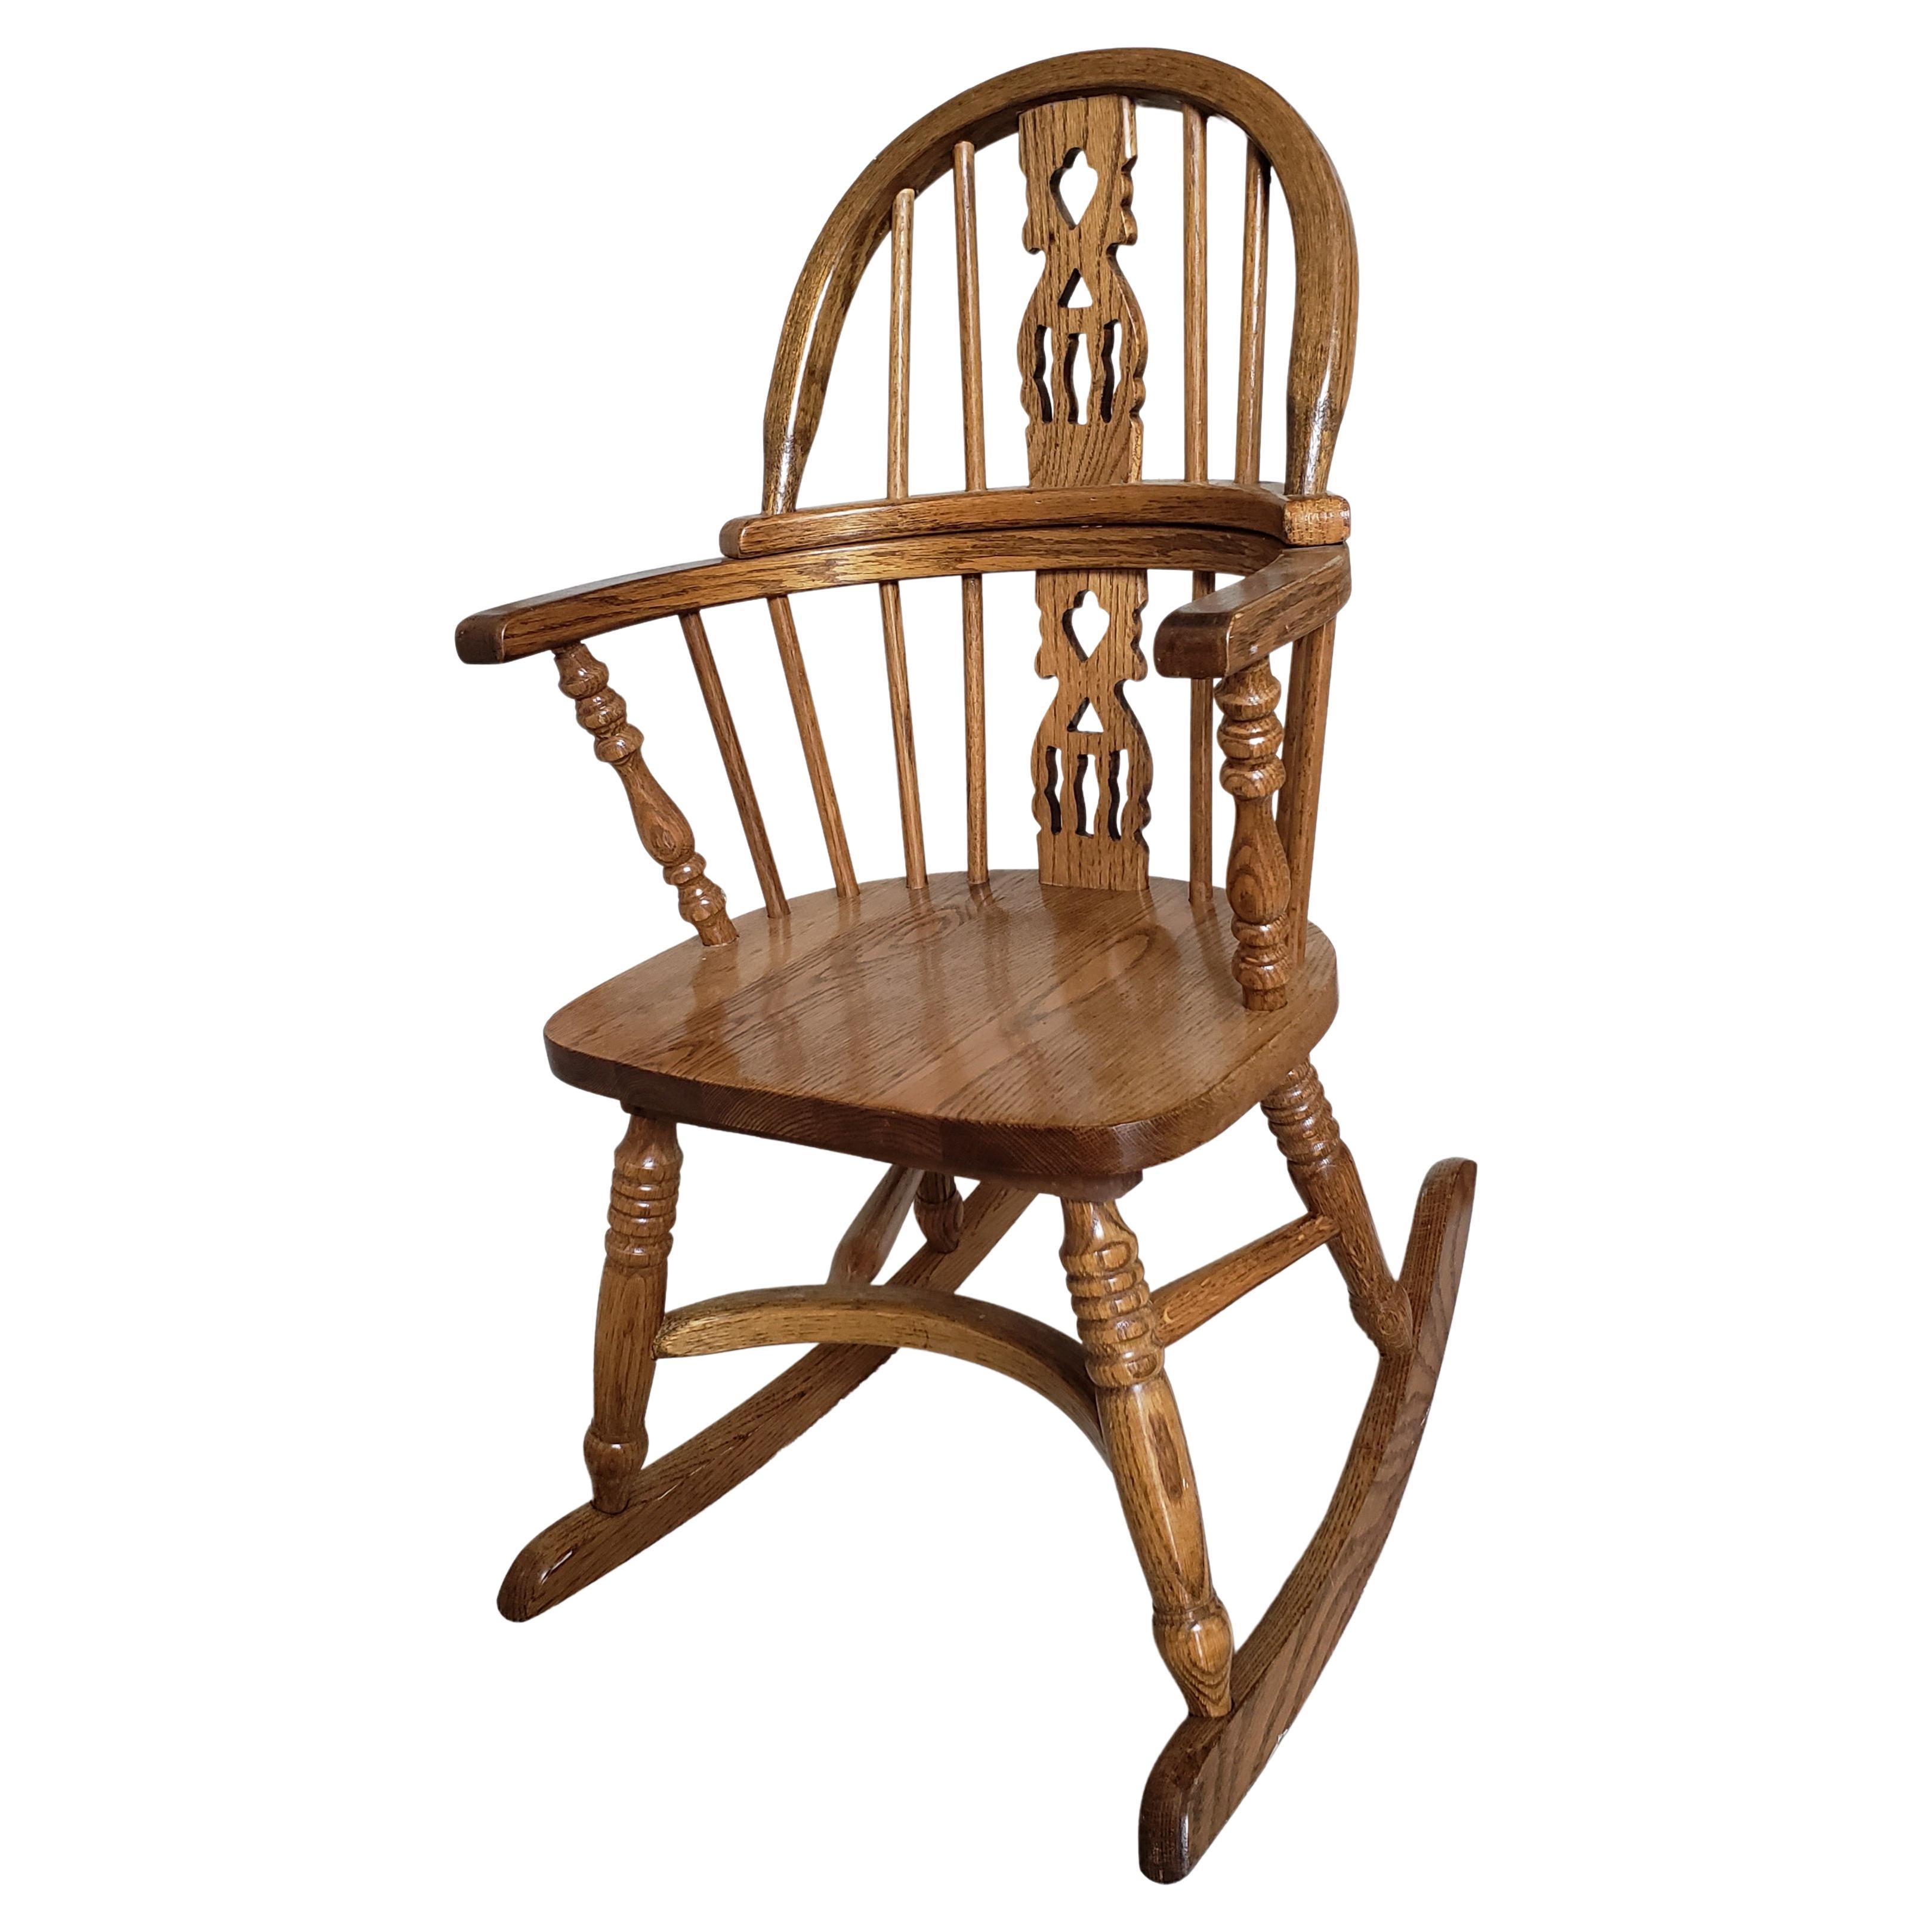 Your child will love this rocking chair! It's a true heirloom piece that can be passed down to generations to come! It's the perfect piece for a reading nook or in the living room.
Amish made in the USA
Solid Oak wood
Stained in Seely